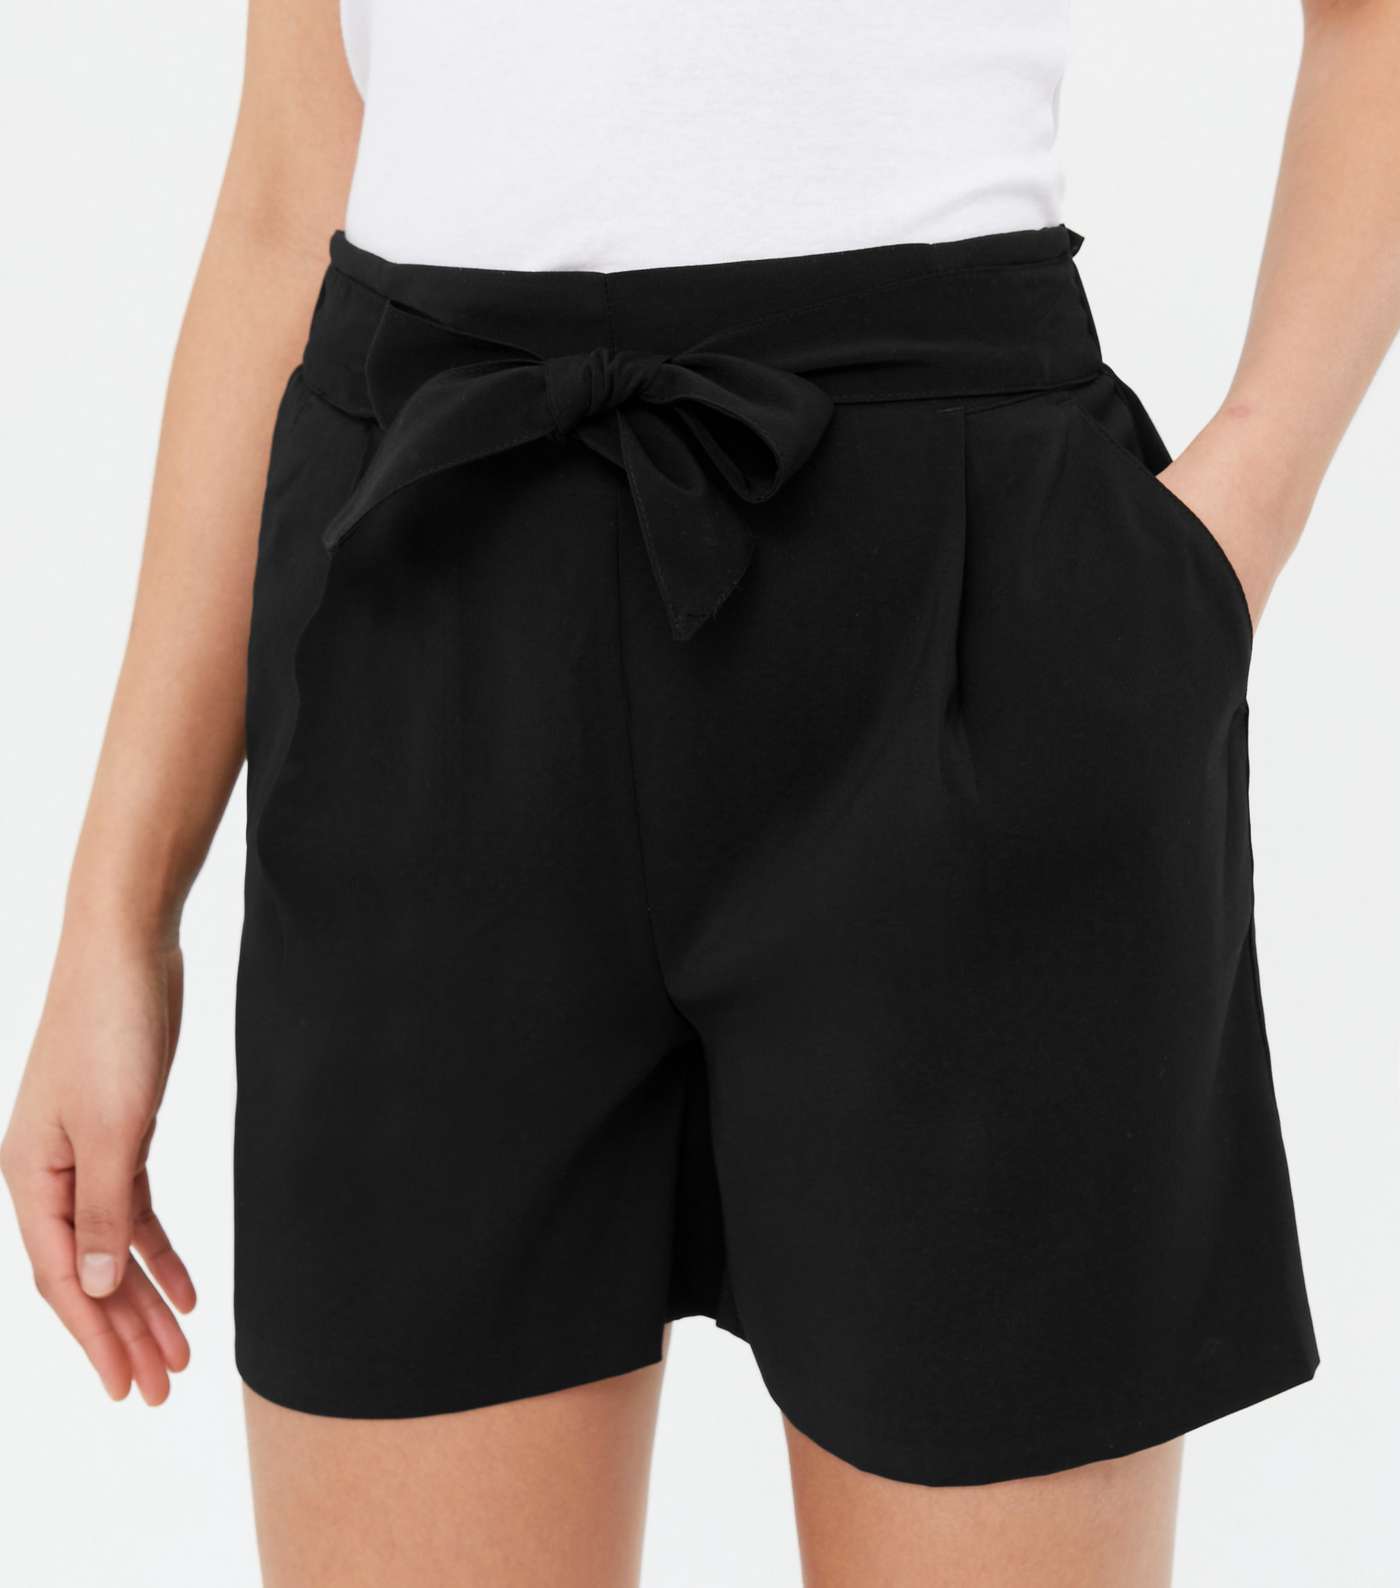 Tall Black Tie Front High Waist Shorts Image 3